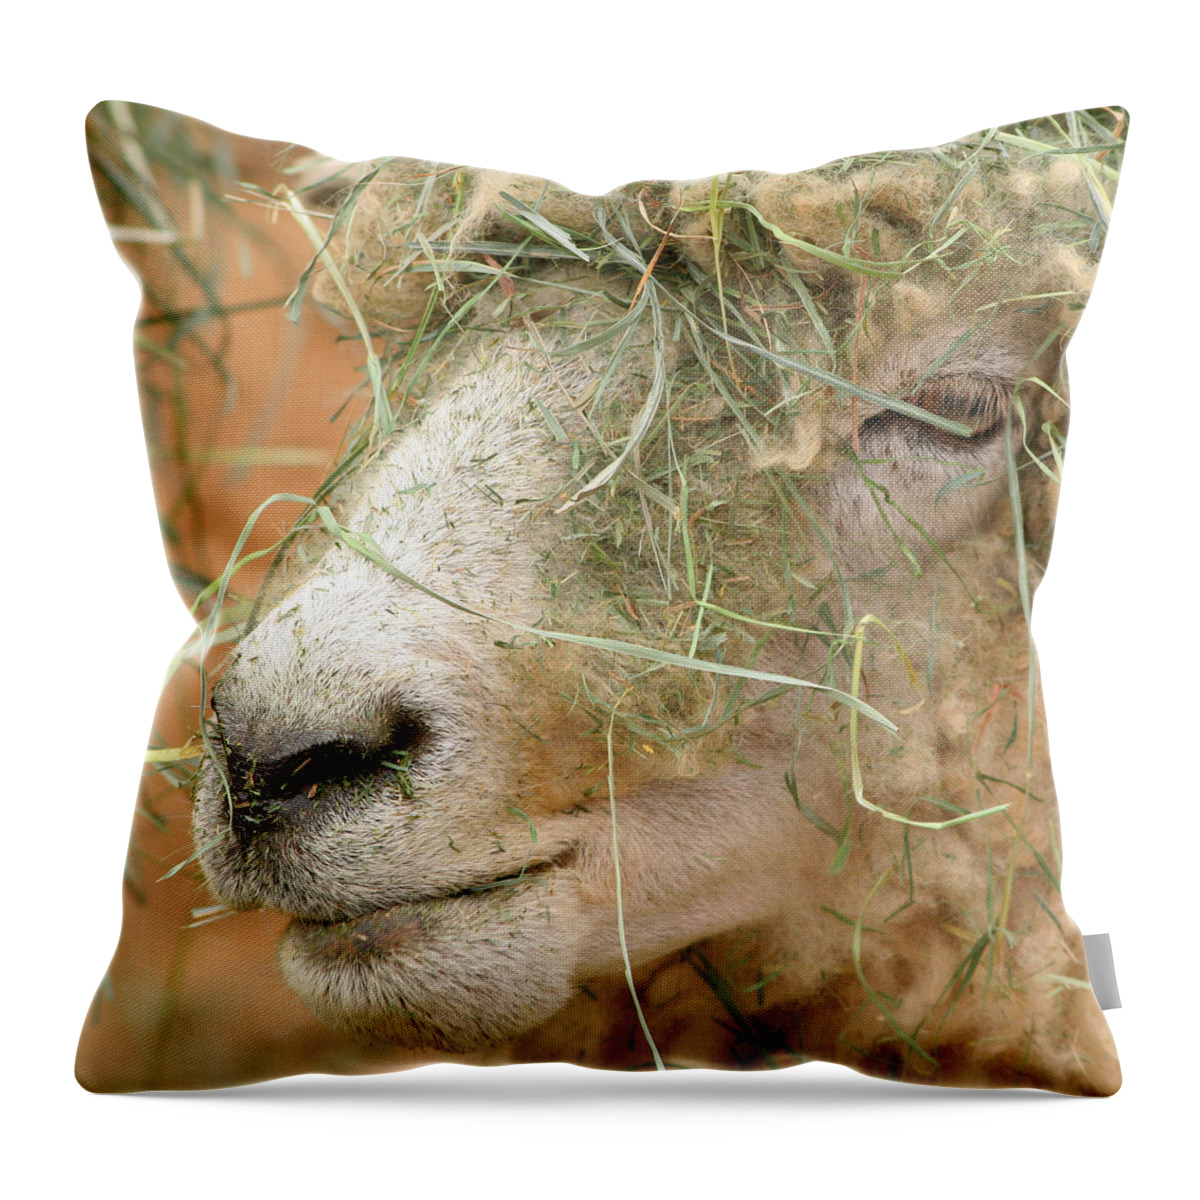 Sheep Throw Pillow featuring the photograph New Hair Style by Art Block Collections